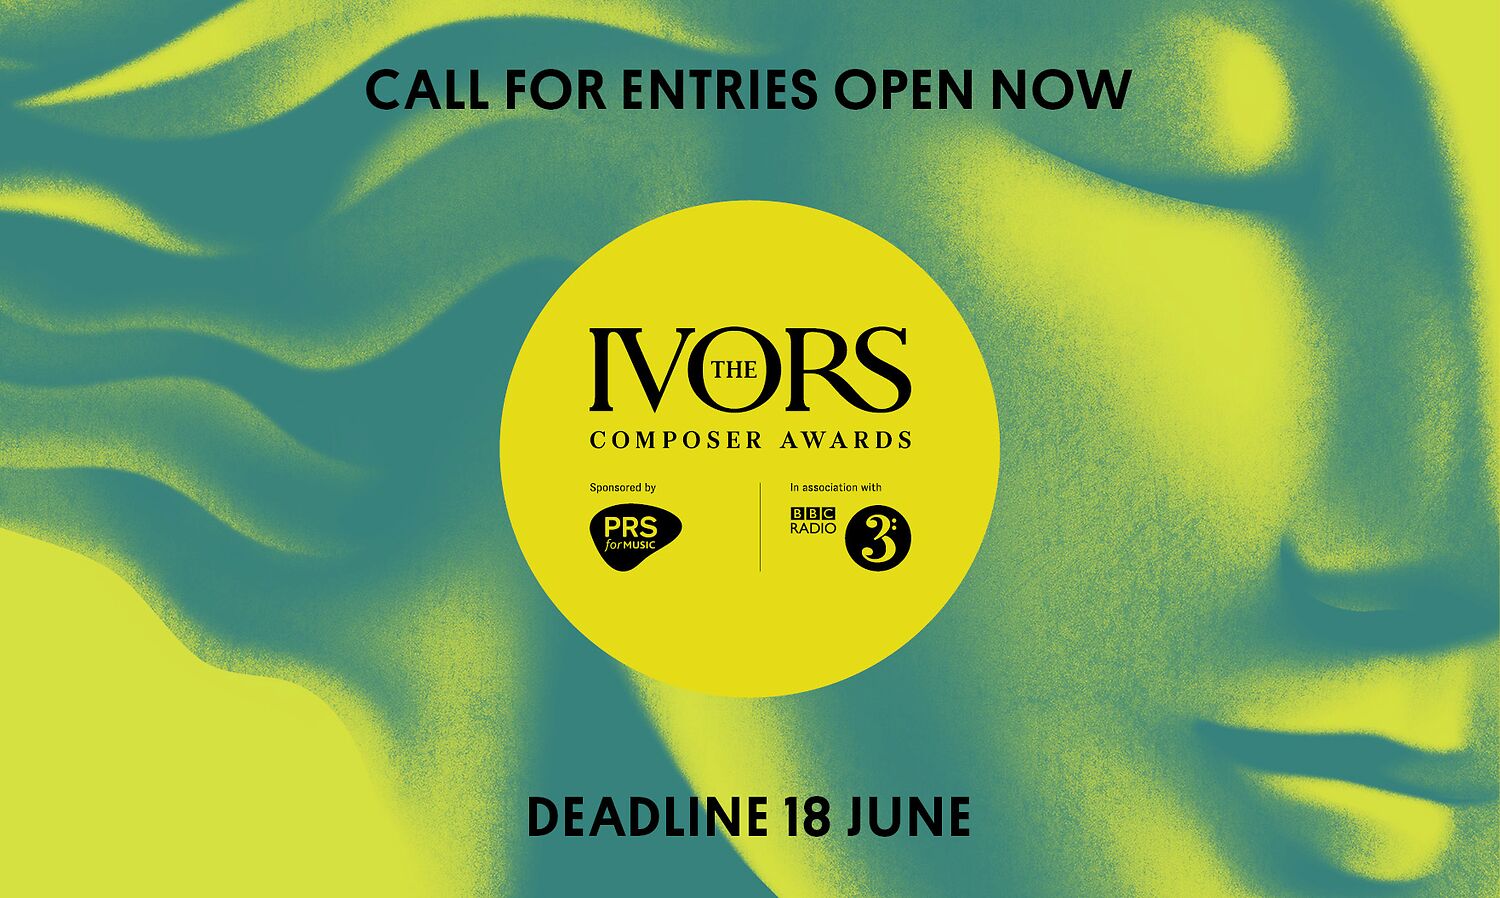 The Ivors Composer Awards 2021 call for entries is open